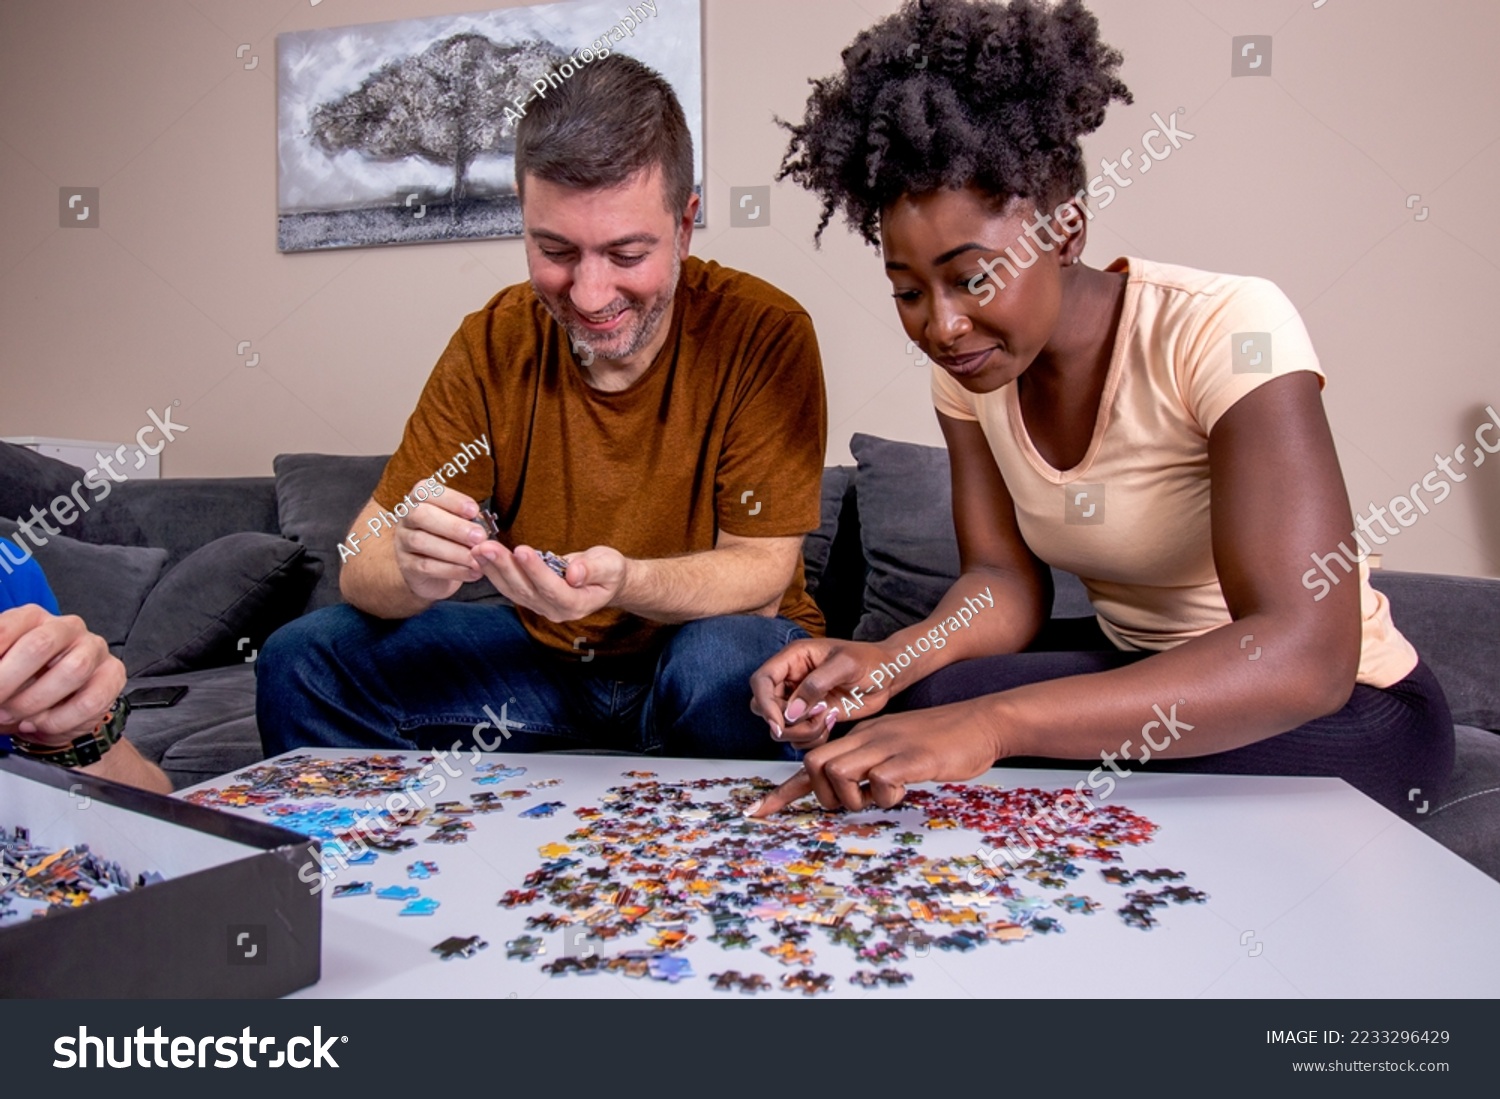 A couple playing with a jigsaw puzzle at home, on a white wooden table. Putting things together and solving problems. Fun and diversity in friendship. #2233296429